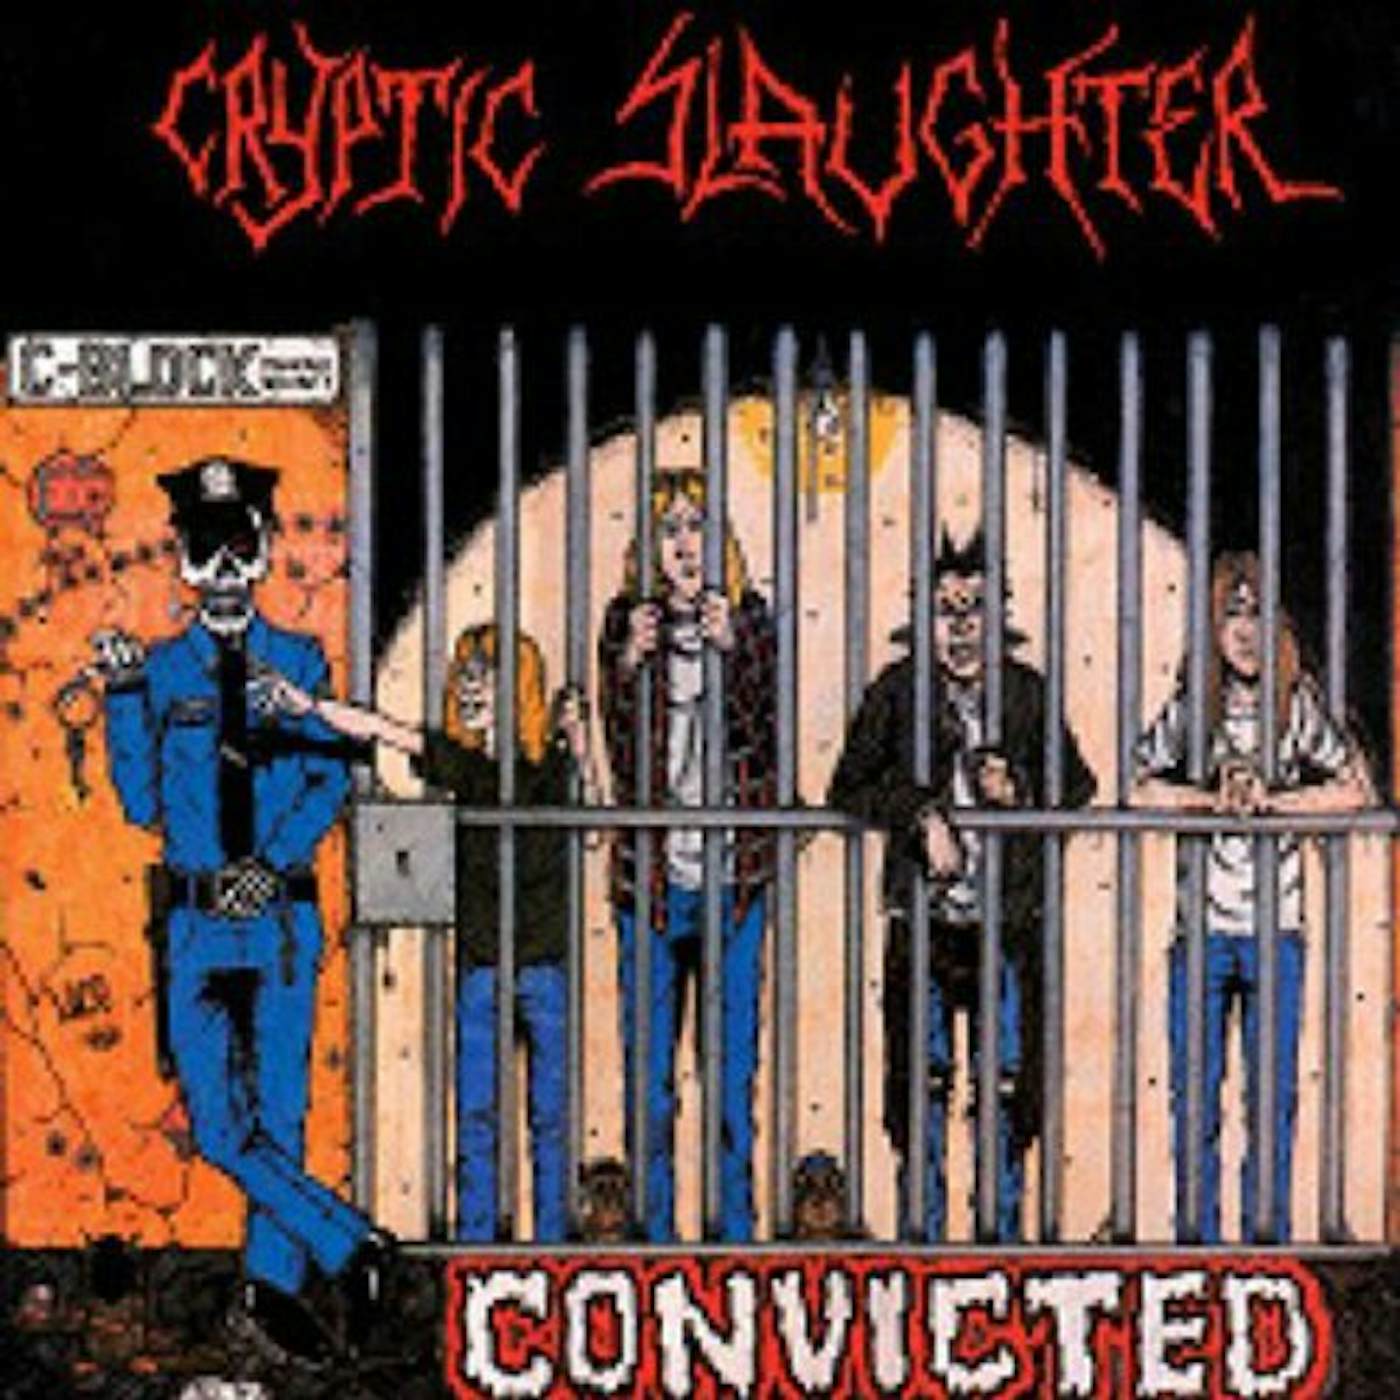 Cryptic Slaughter Convicted Vinyl Record